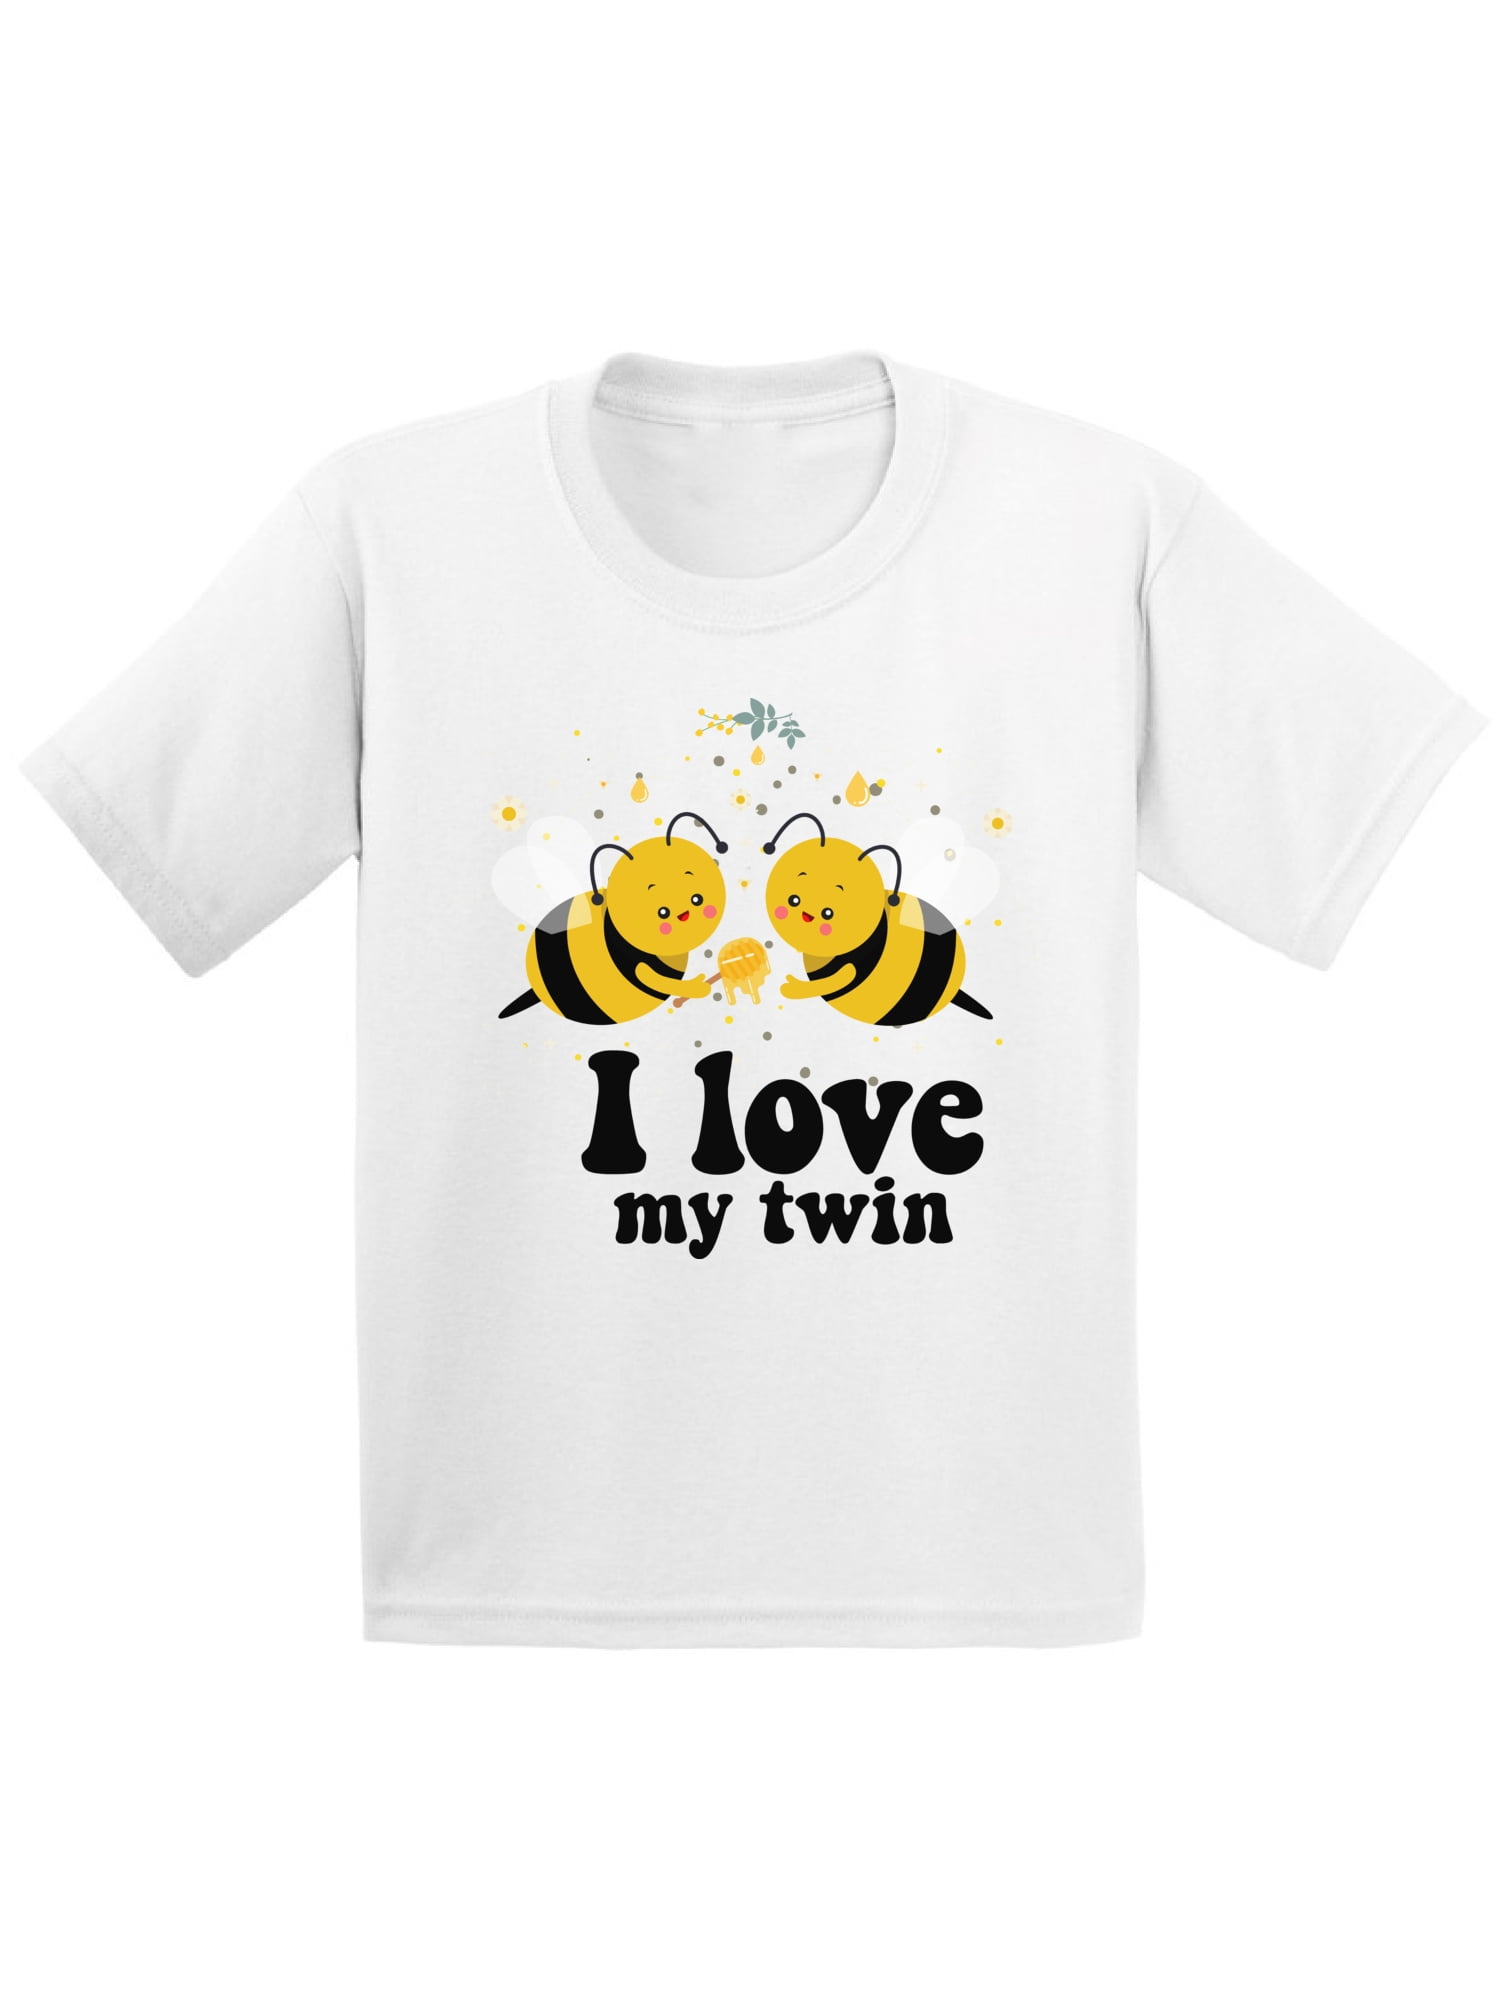 twin t shirts for toddlers